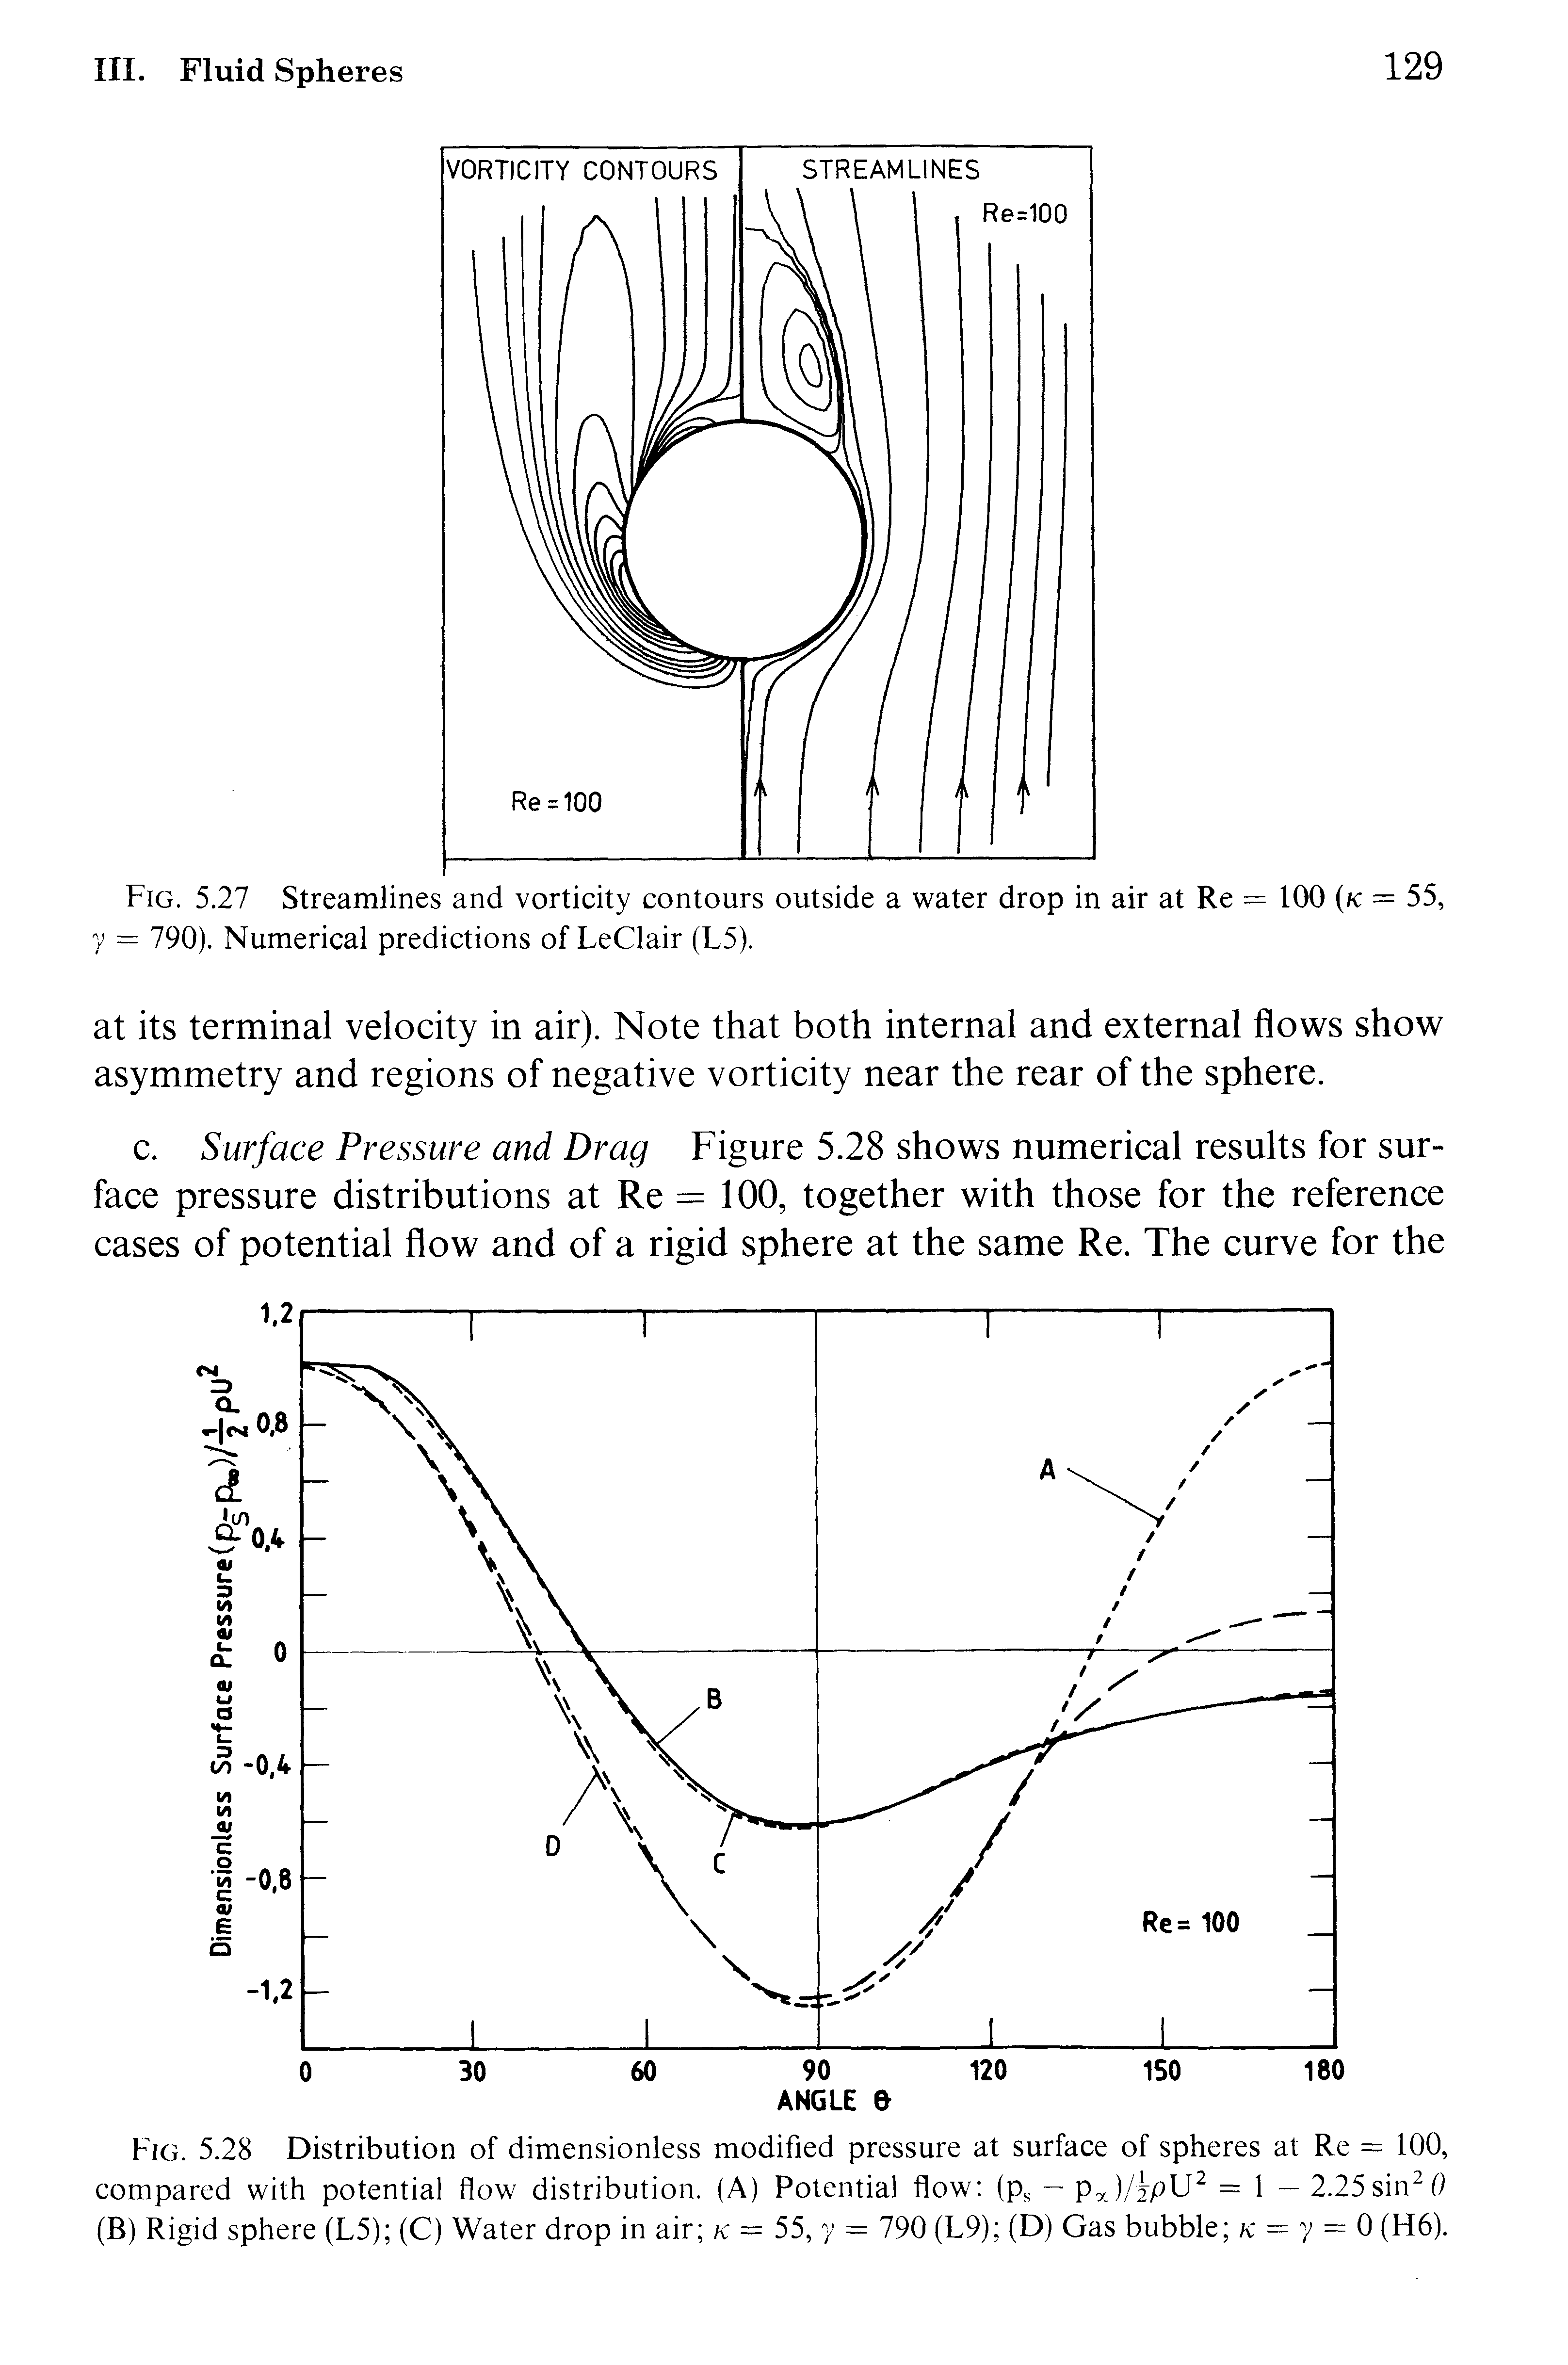 Fig. 5.28 Distribution of dimensionless modified pressure at surface of spheres at Re = 100, compared with potential flow distribution. (A) Potential flow (p, — Px)/ipU = 1 — 2.25sin fl (B) Rigid sphere (L5) (C) Water drop in air k = 55, y = 790 (L9) (D) Gas bubble k — y 0 (H6).